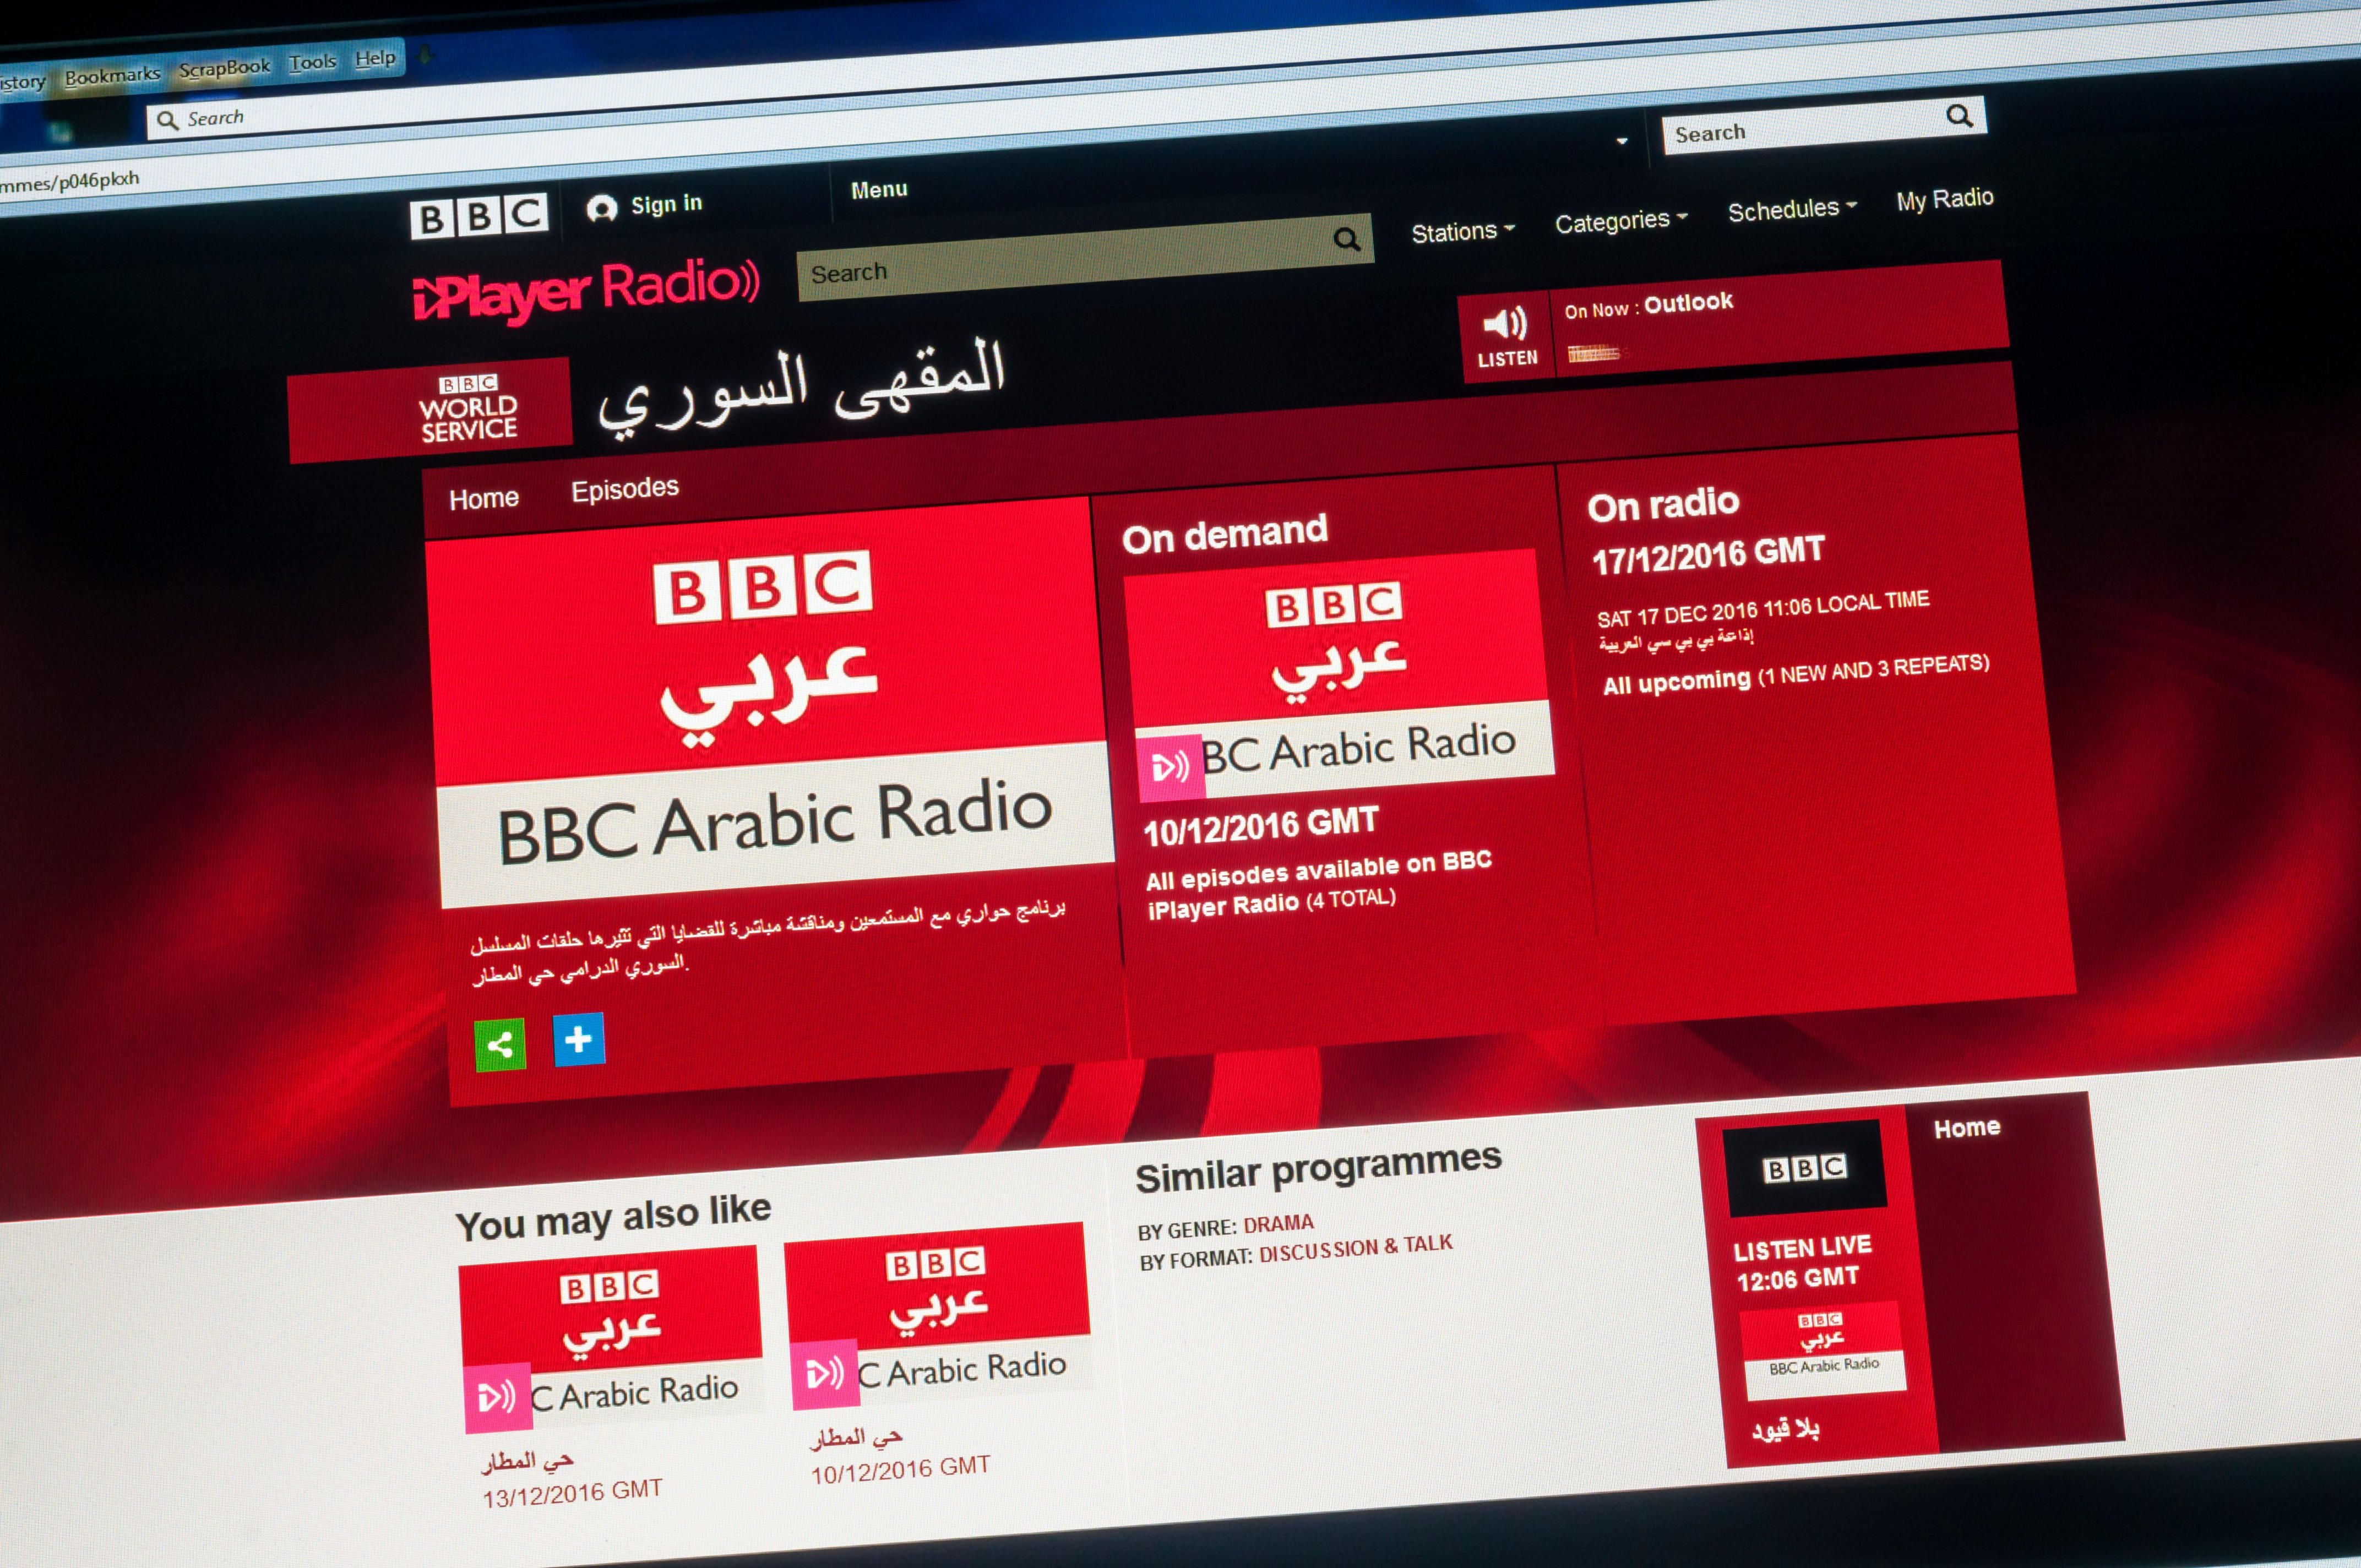 Galaxia contraste oyente BBC Arabic radio goes off air after 85 years